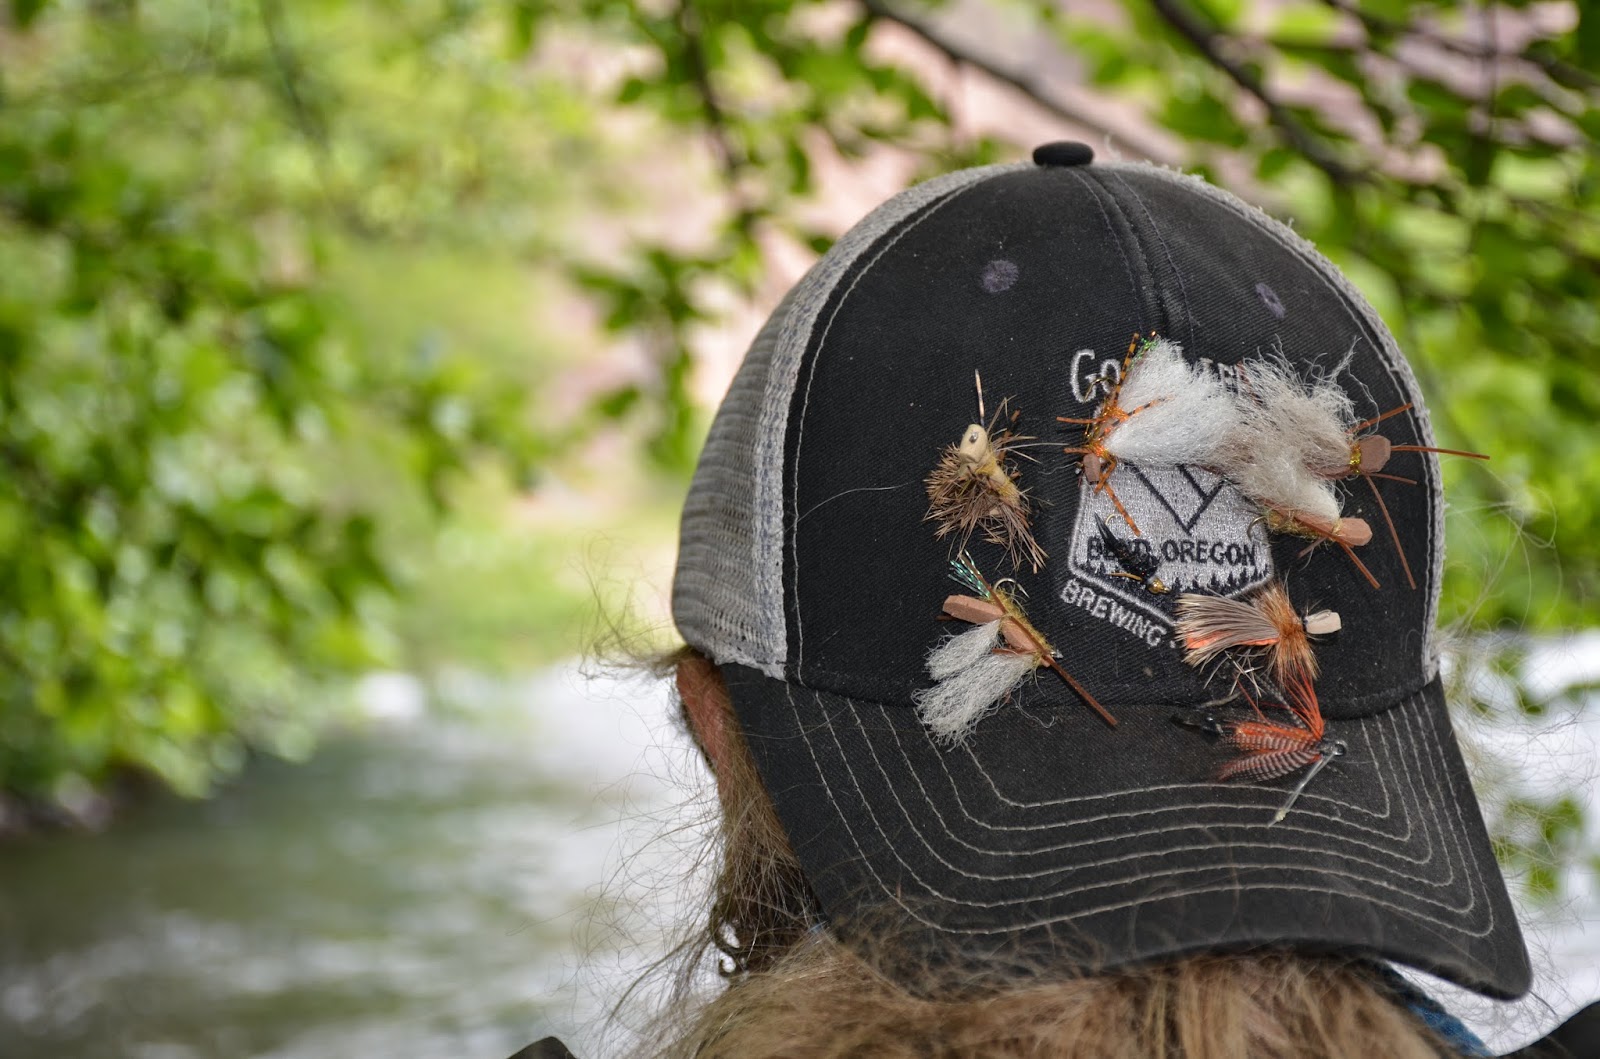 Deschutes River Salmon Fly Report May 2015